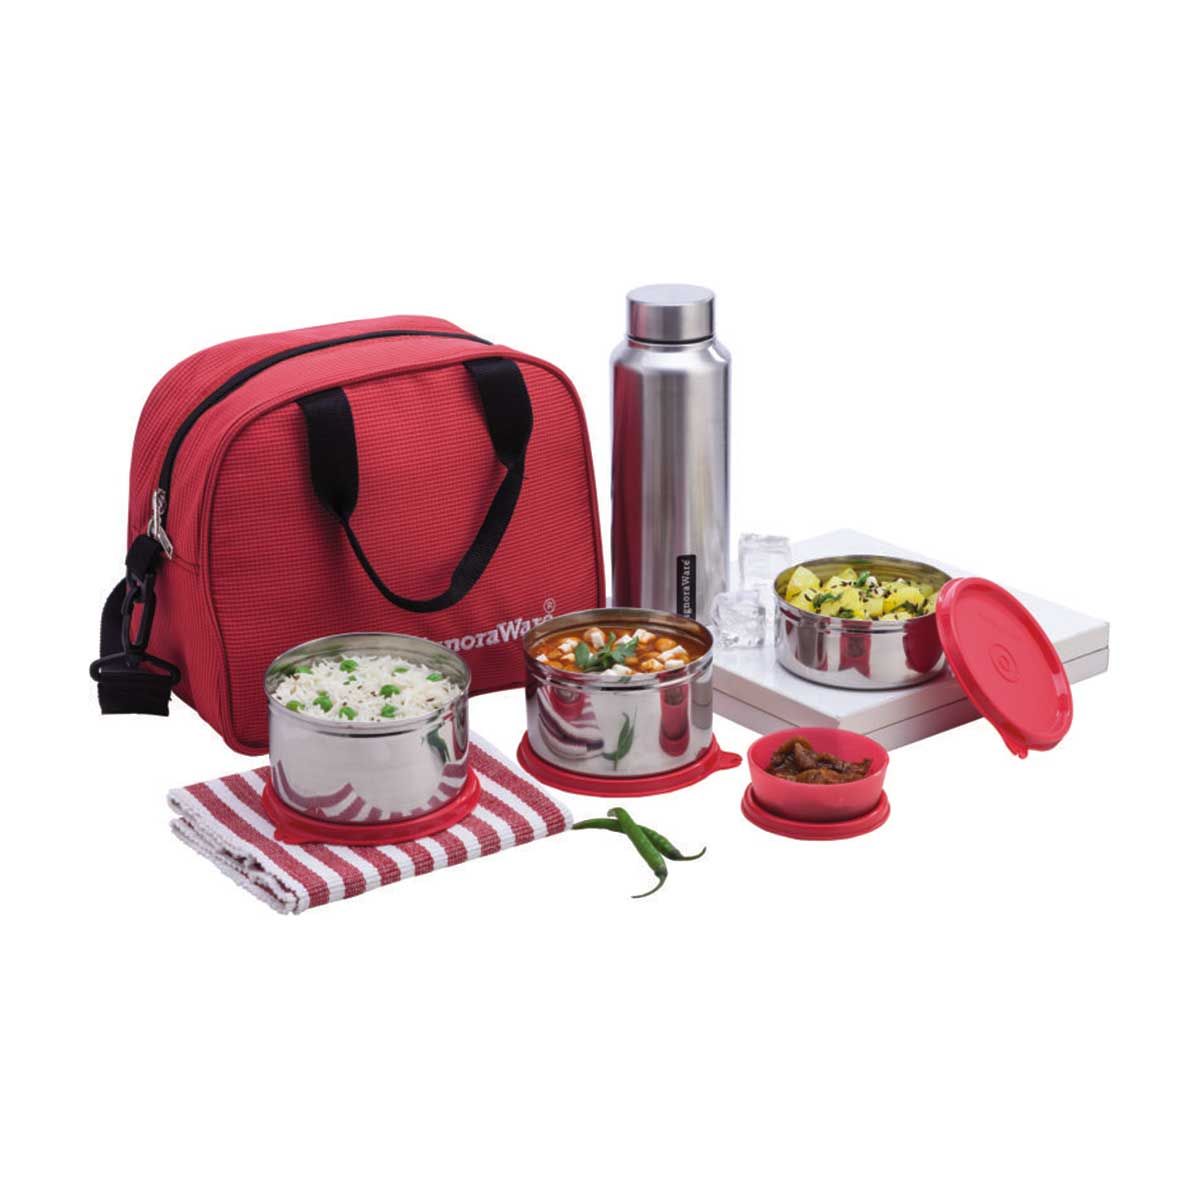 Signoraware Sling Steel Stainless Steel Lunch Box with Bag